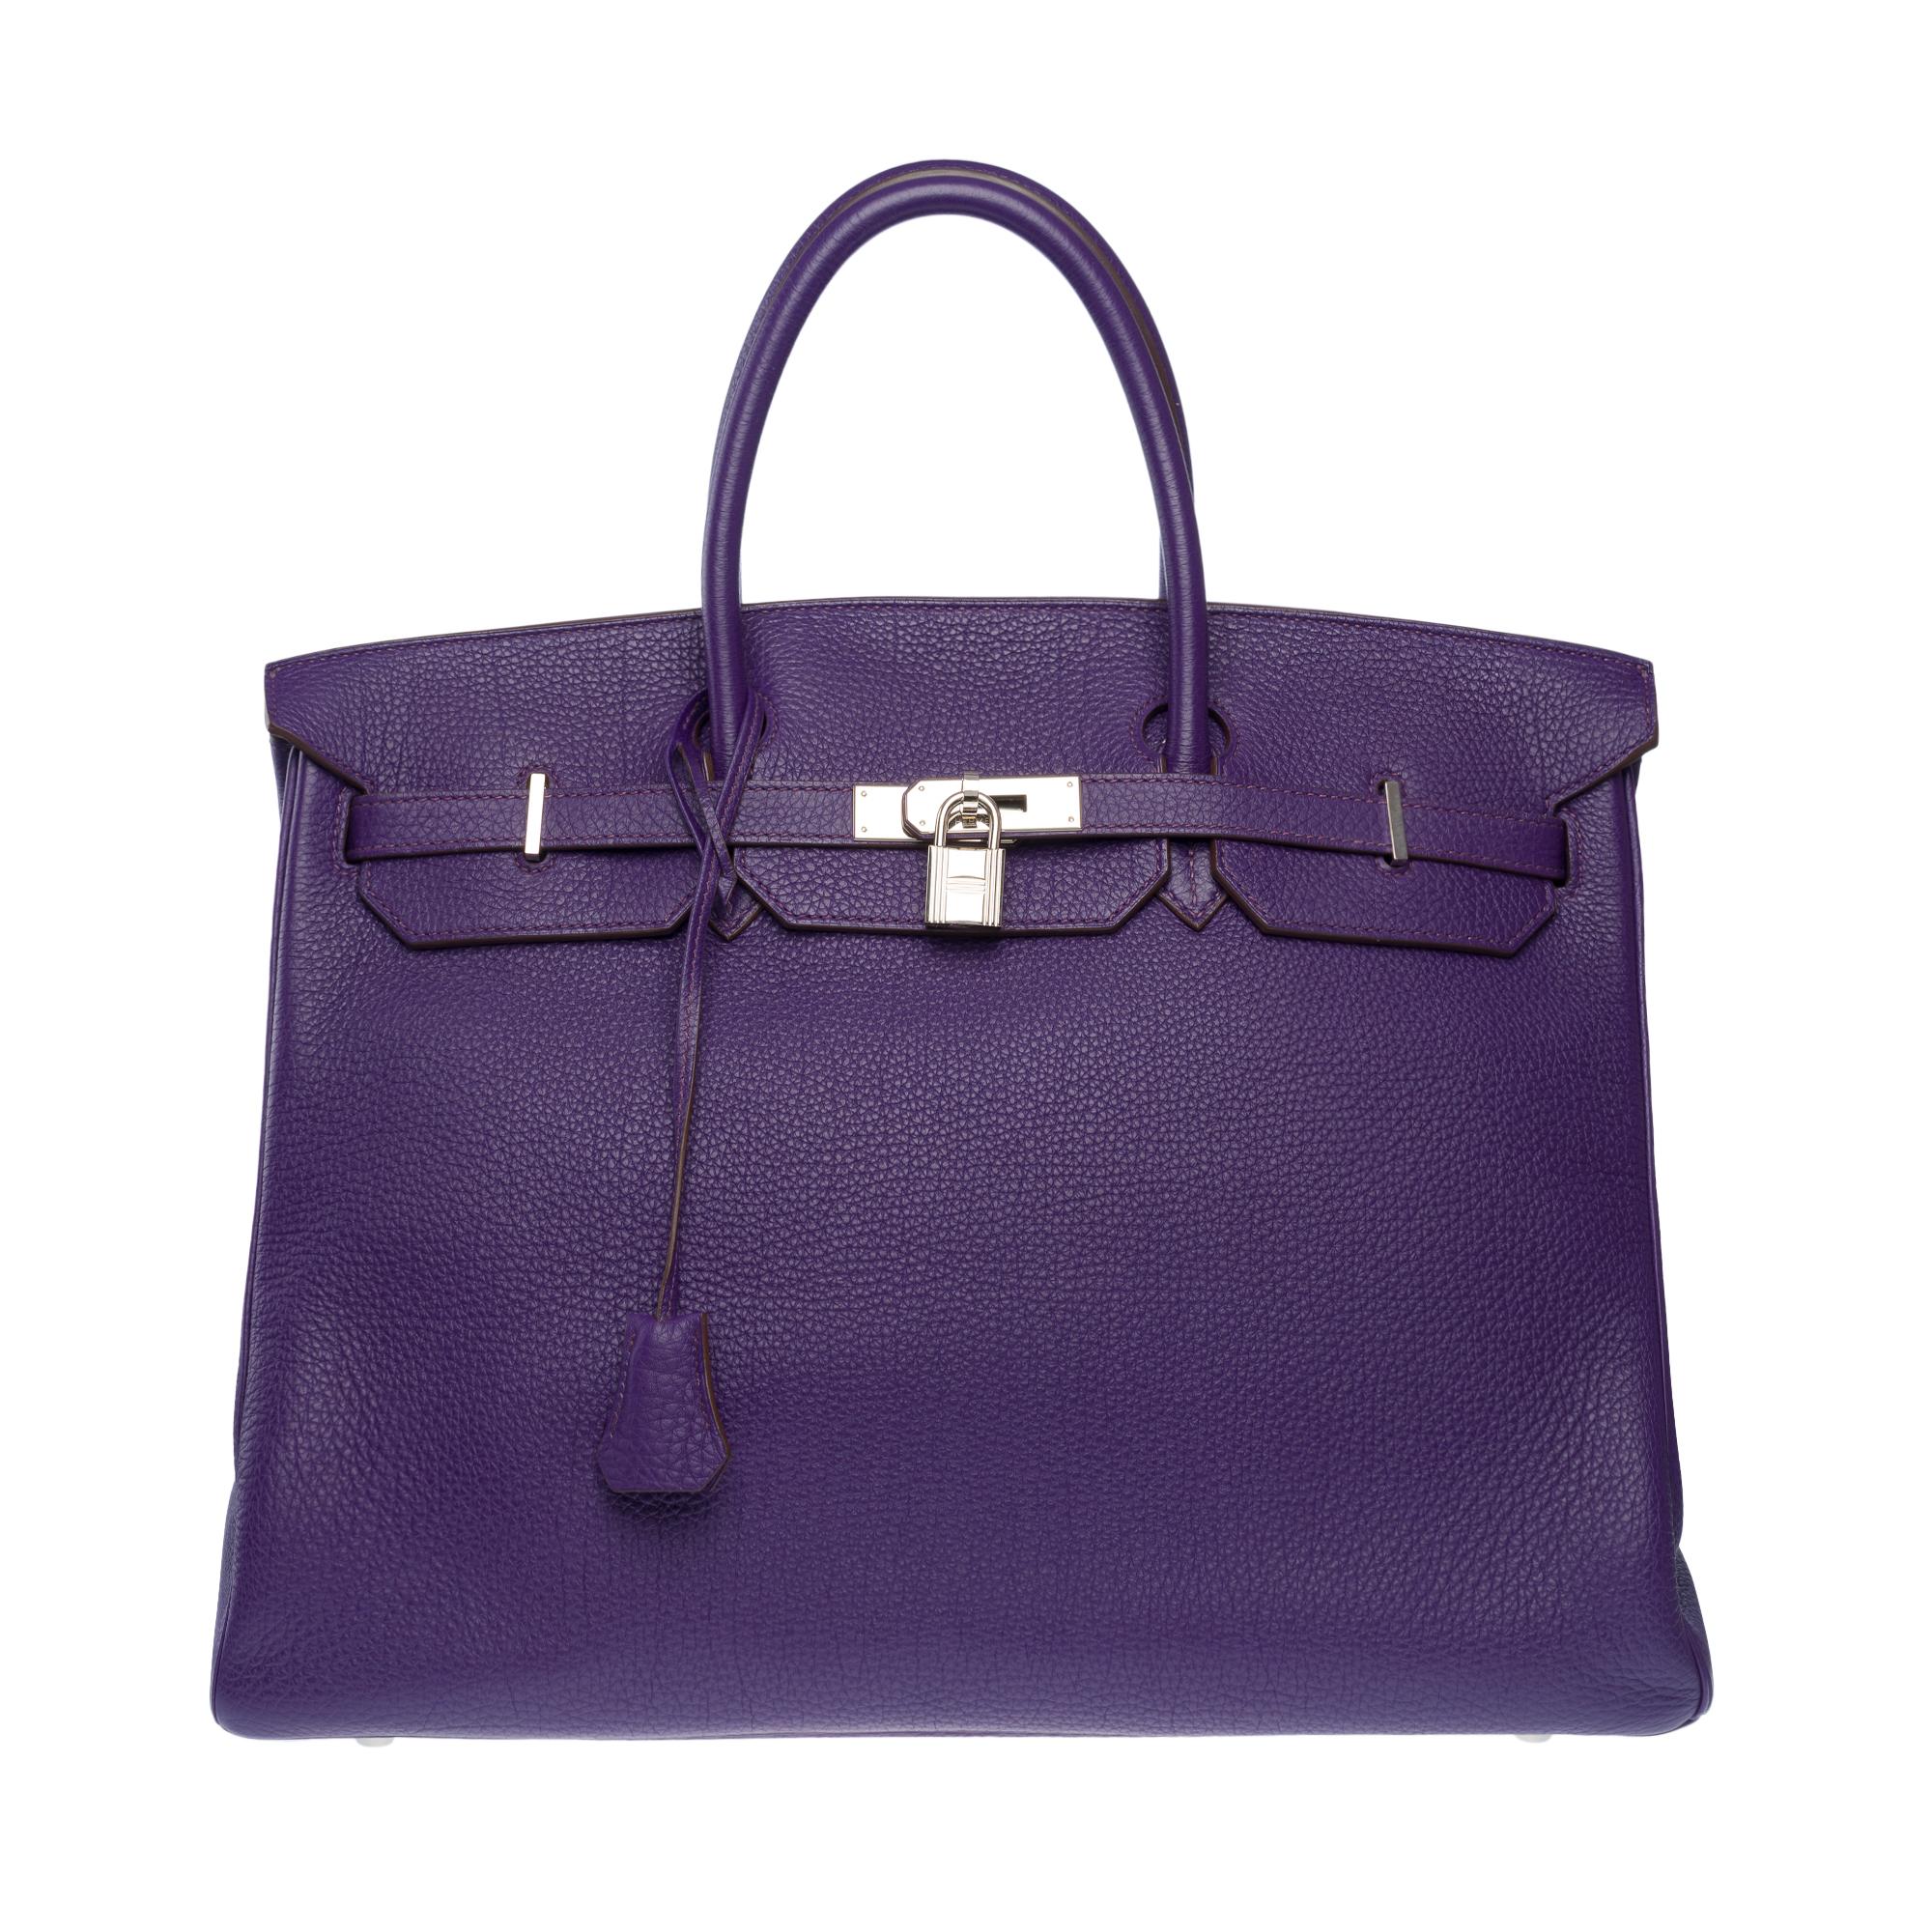 Beautiful​ ​Hermes​ ​Birkin​ ​40​ ​in​ ​Iris​ ​Togo​ ​leather,​ ​palladium​ ​silver​ ​metal​ ​trim,​ ​double​ ​handle​ ​in​ ​purple​ ​leather​ ​allowing​ ​a​ ​hand​ ​carry

Flap​ ​closure
Interior​ ​lining​ ​in​ ​purple​ ​leather,​ ​a​ ​zippered​